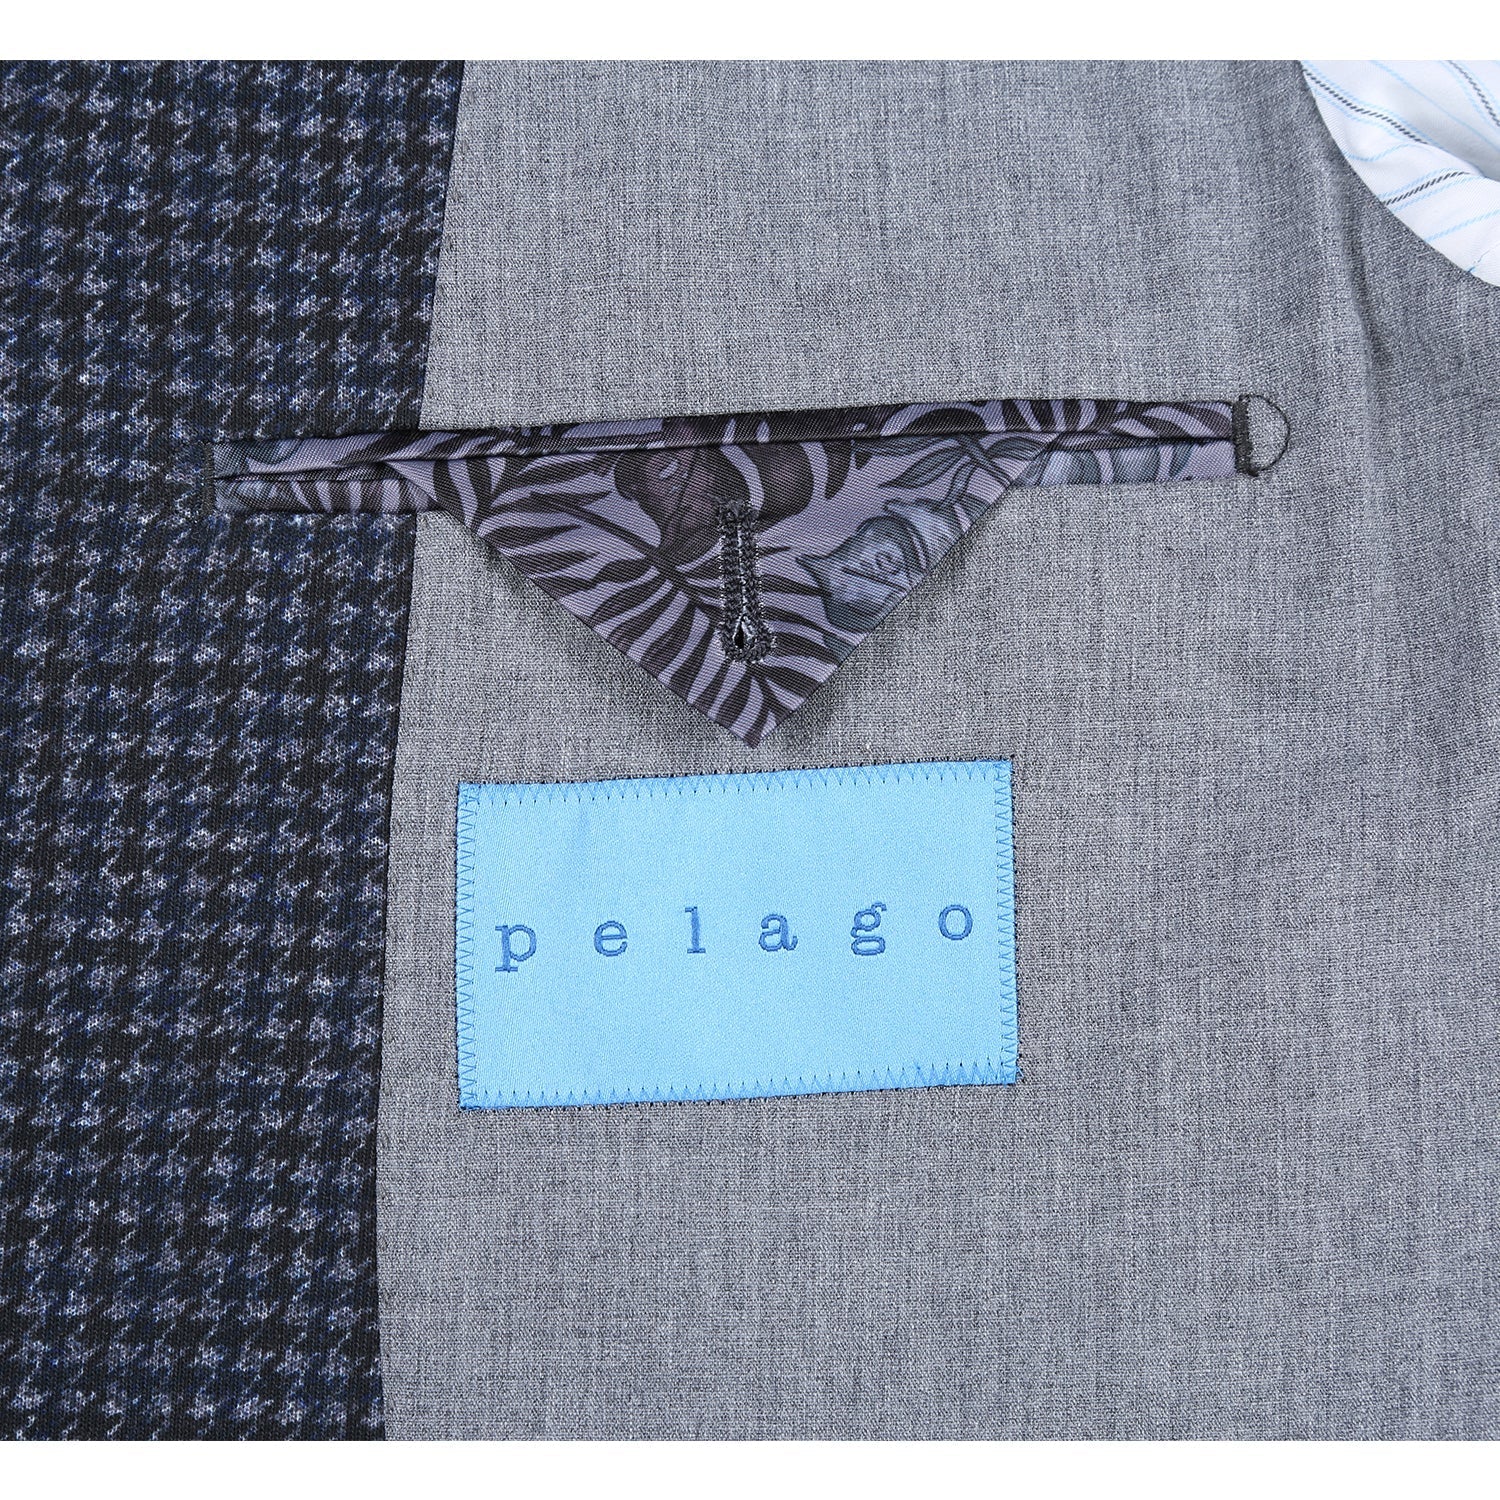 Single Breasted SLIM FIT Half Canvas Soft Jacket in Navy and Grey Houndstooth (Regular and Long Available) by Pelago